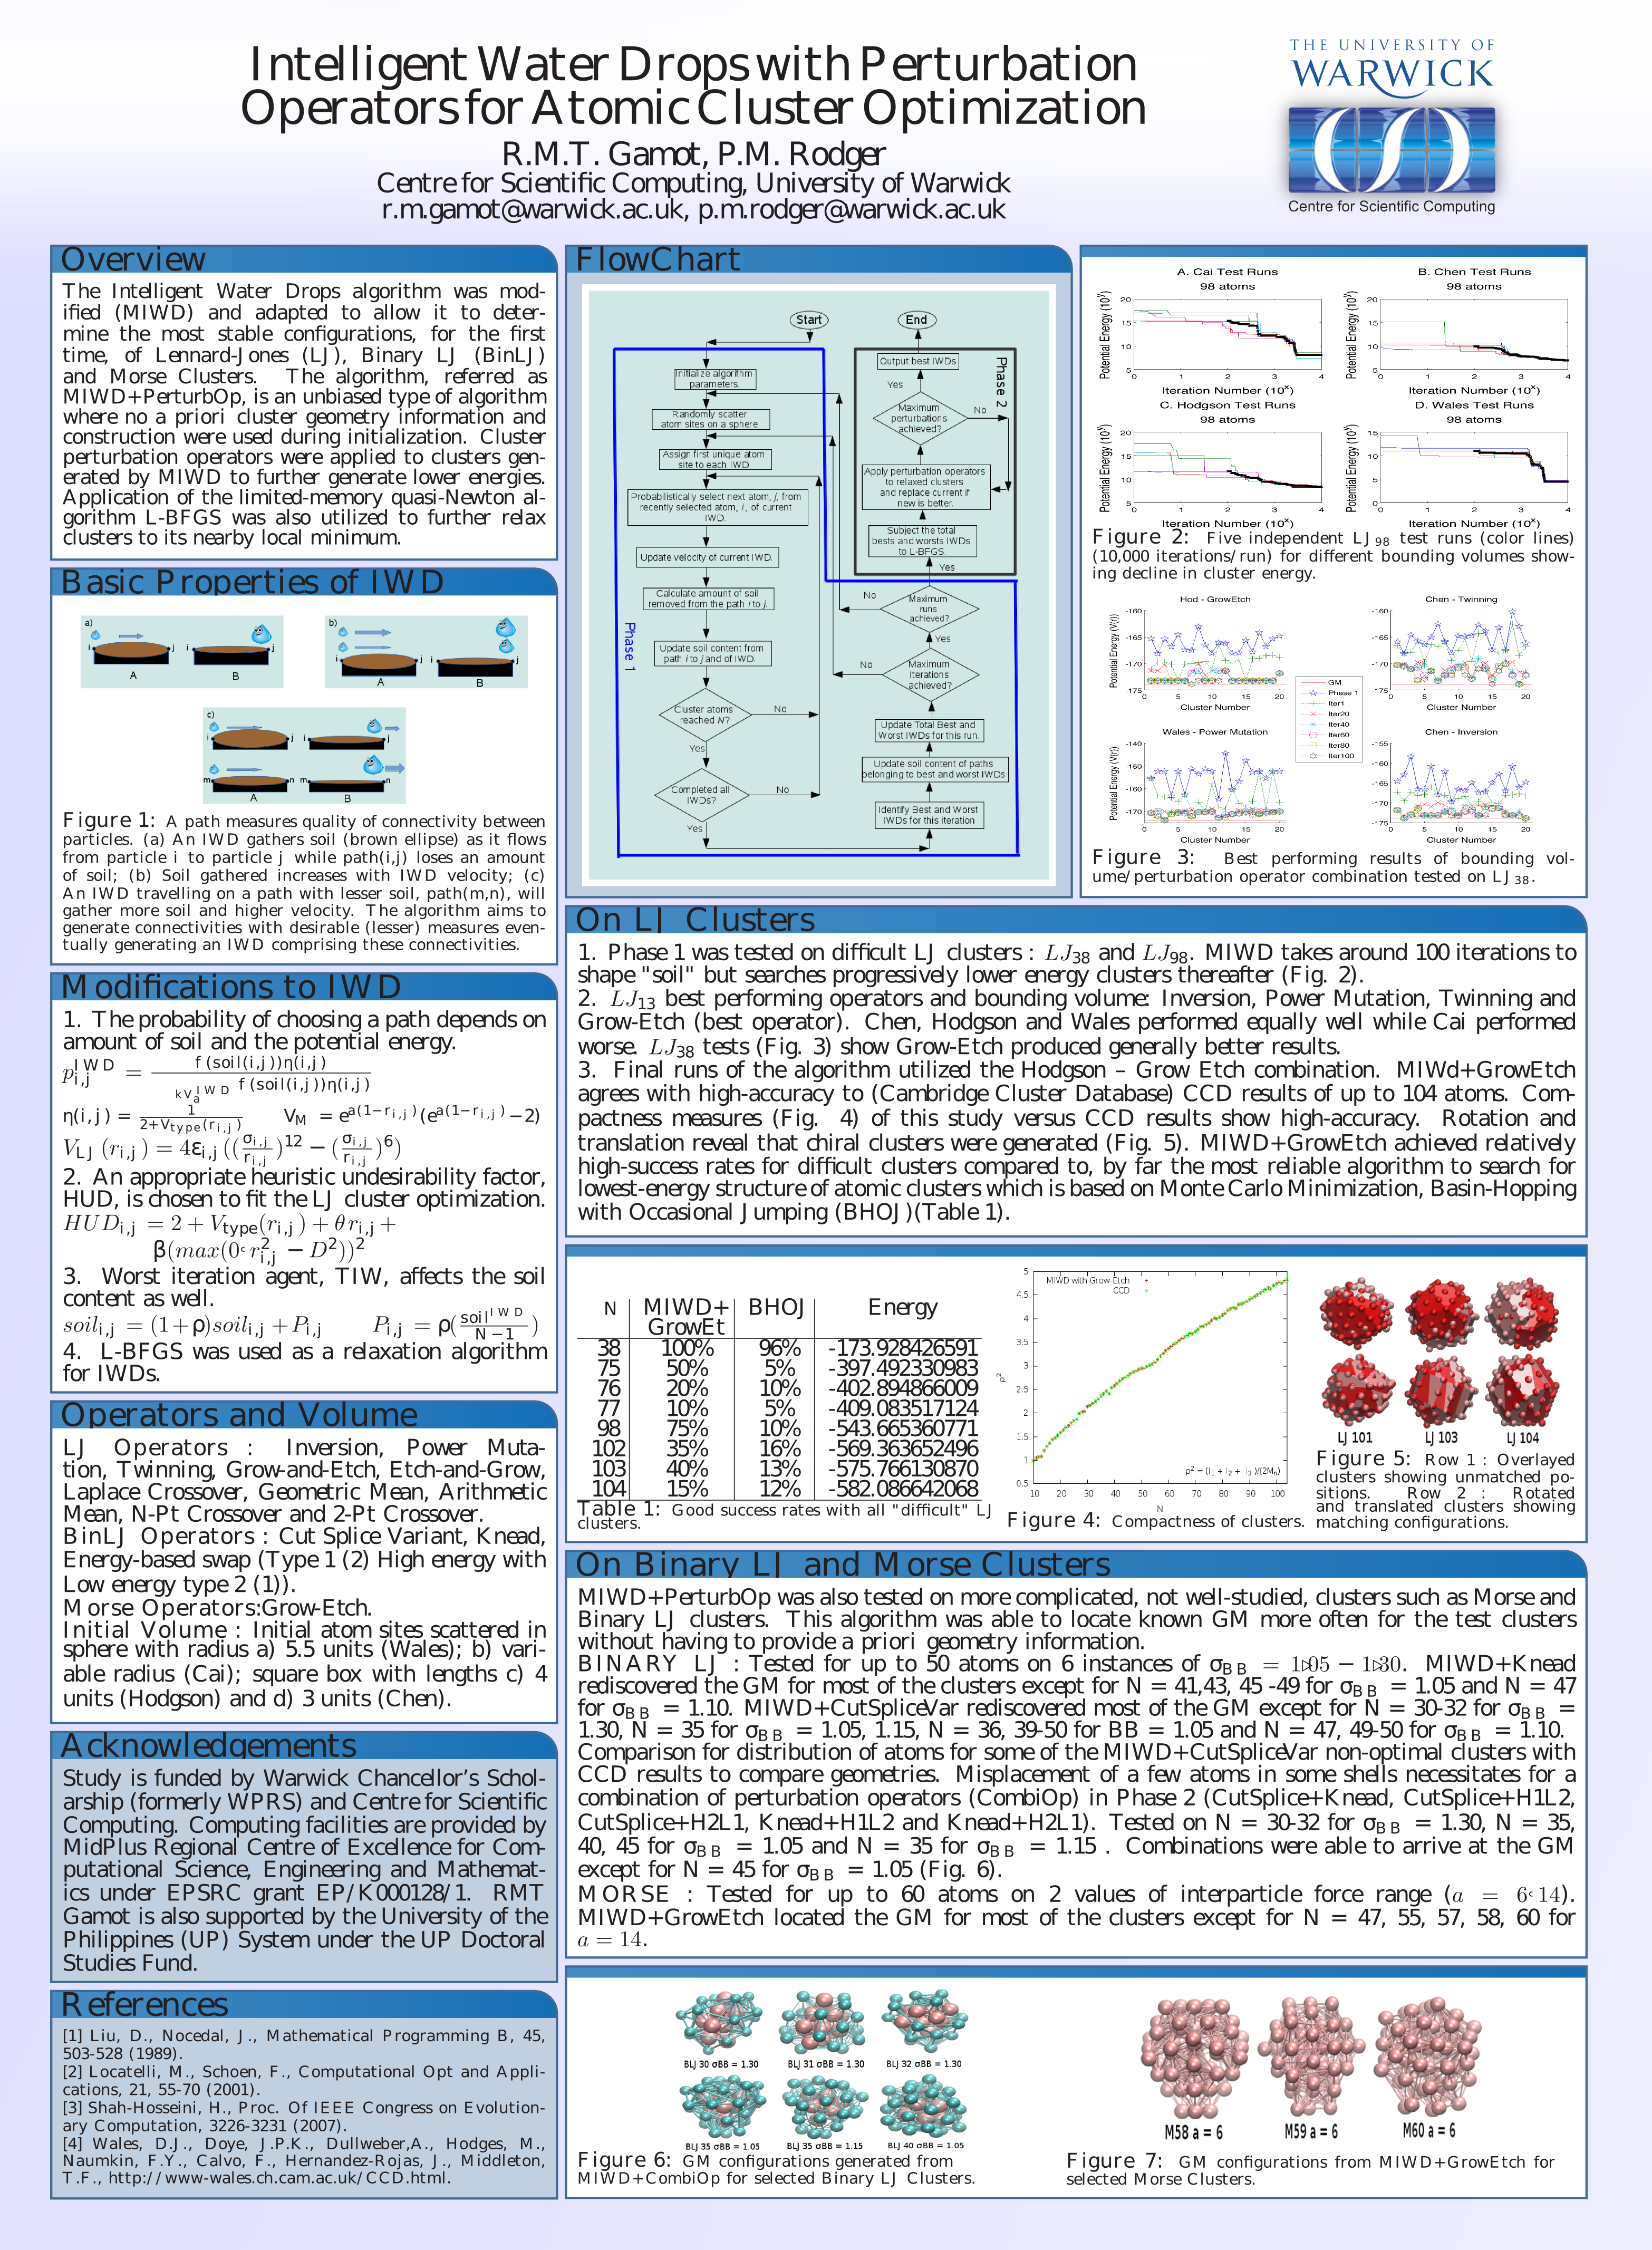 Poster for WATOC 2014